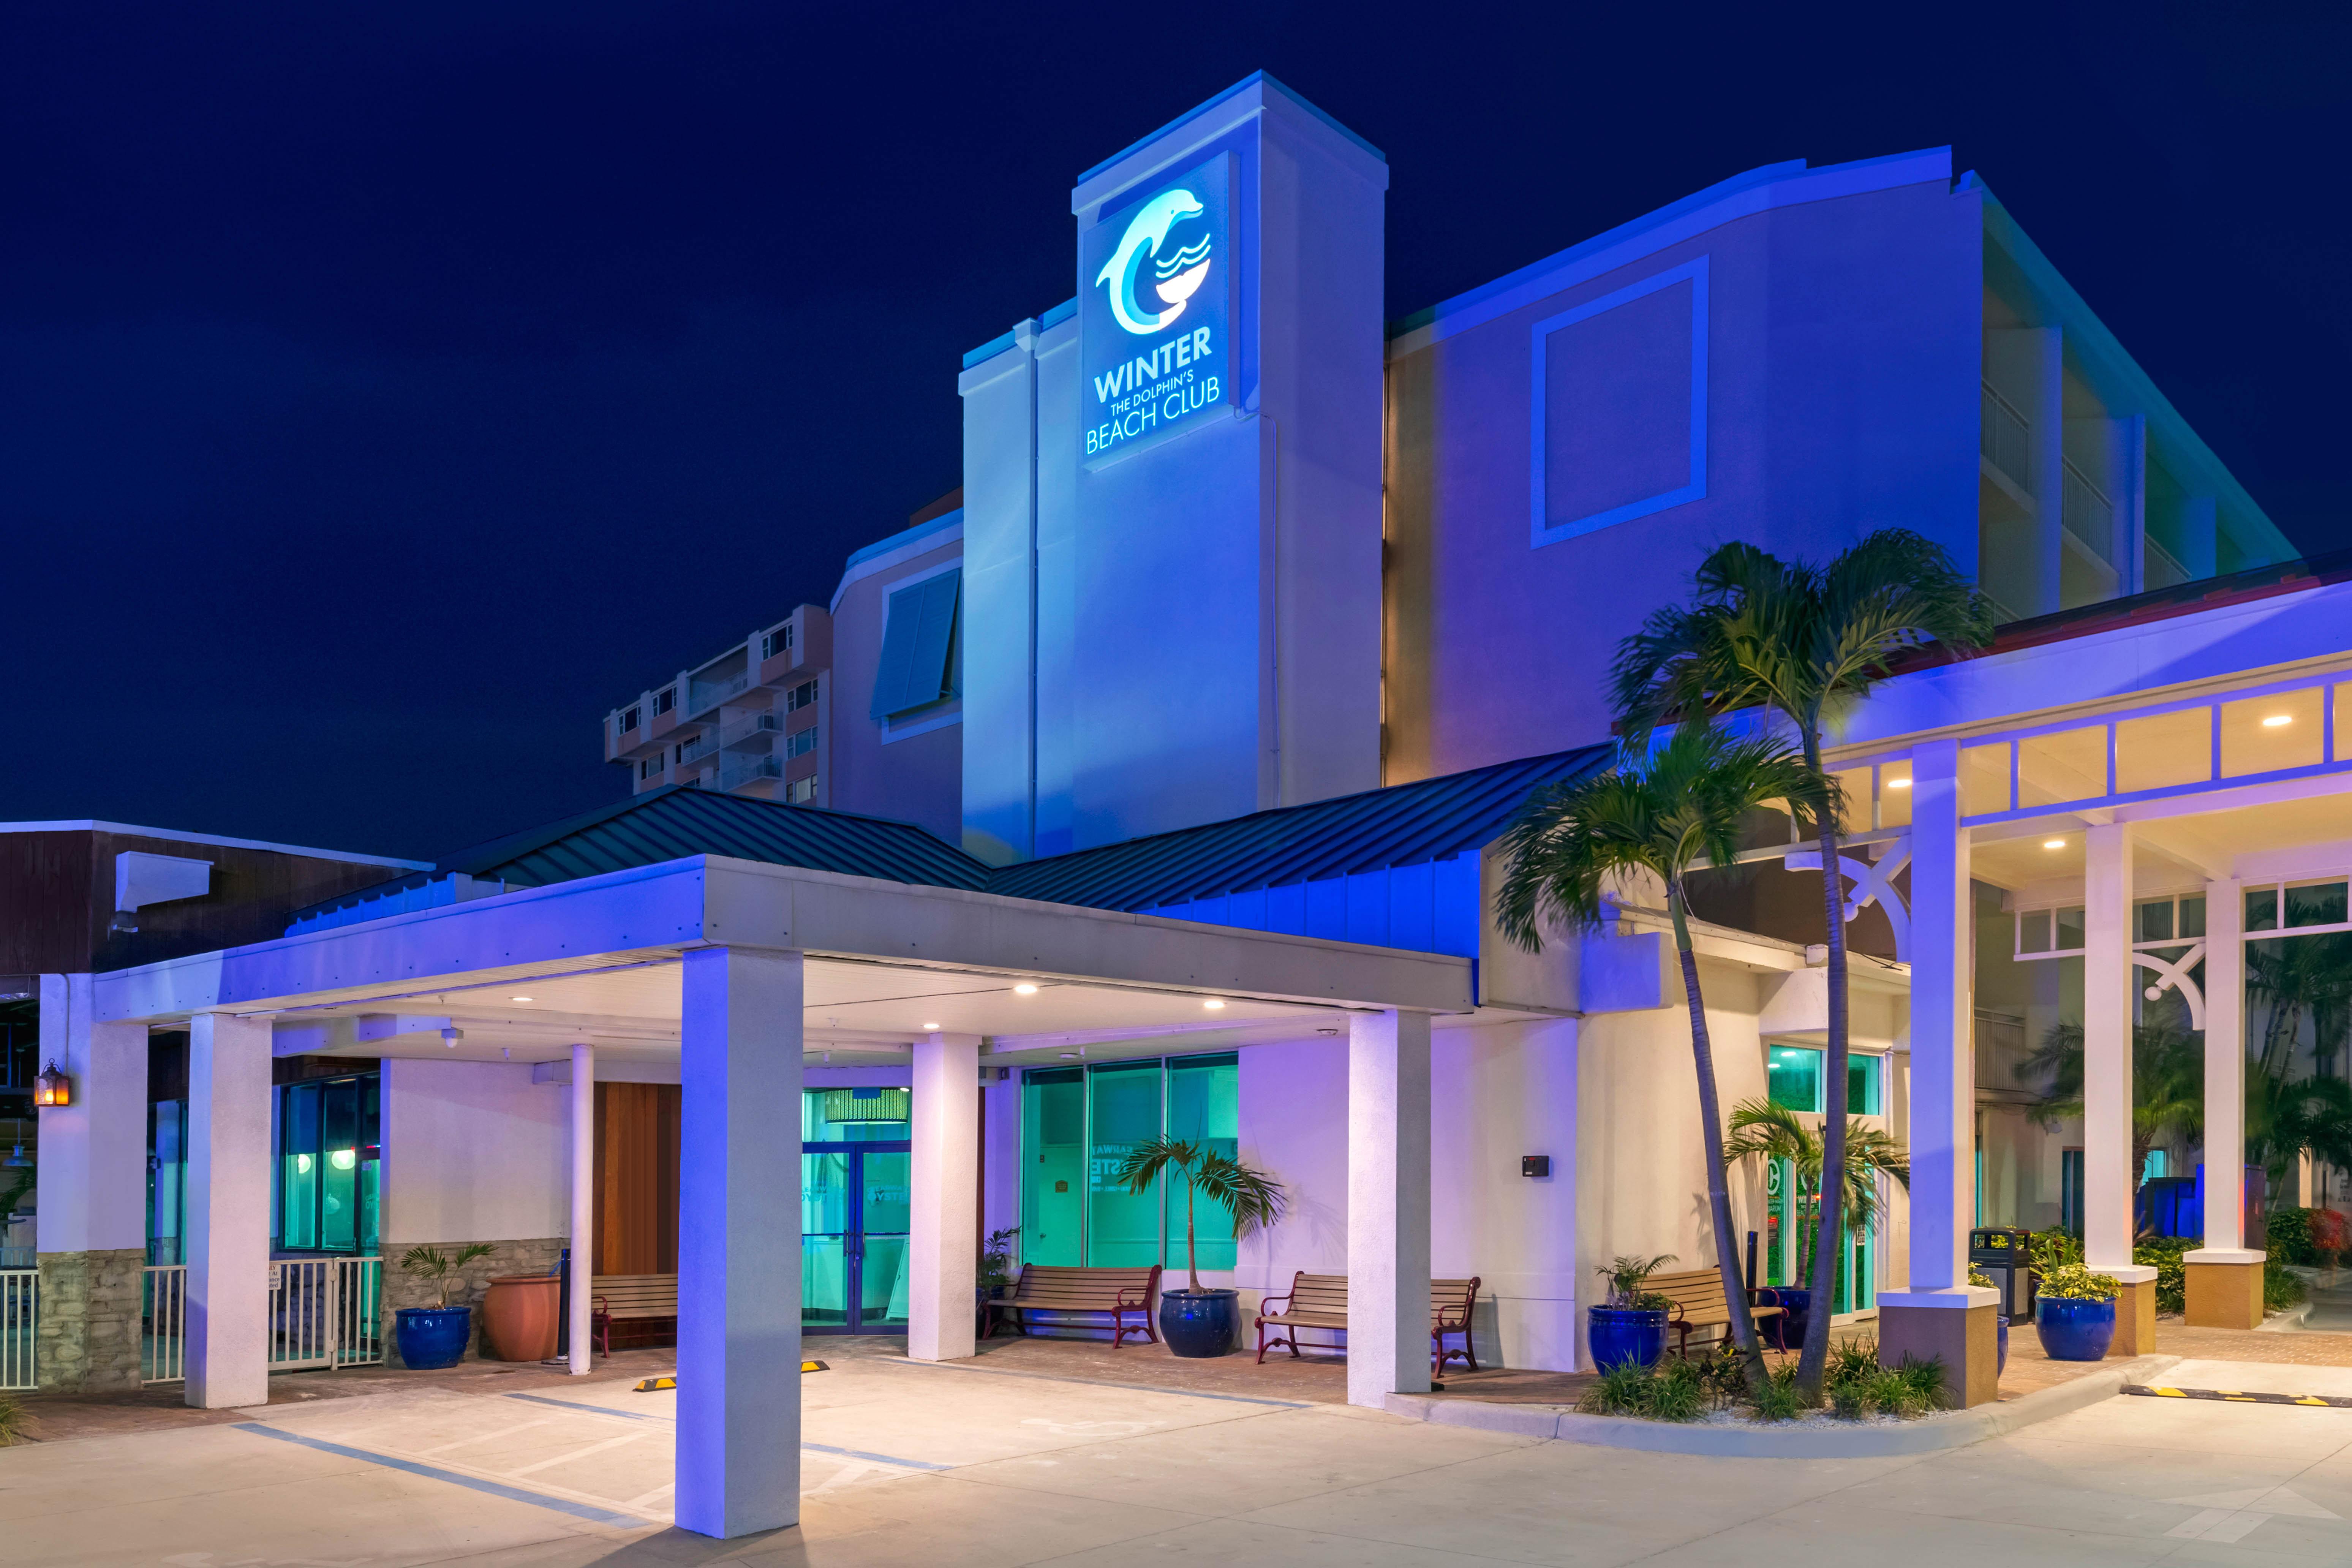 Winter The Dolphins Beach Club, Ascend Hotel Collection Clearwater Beach Exterior photo